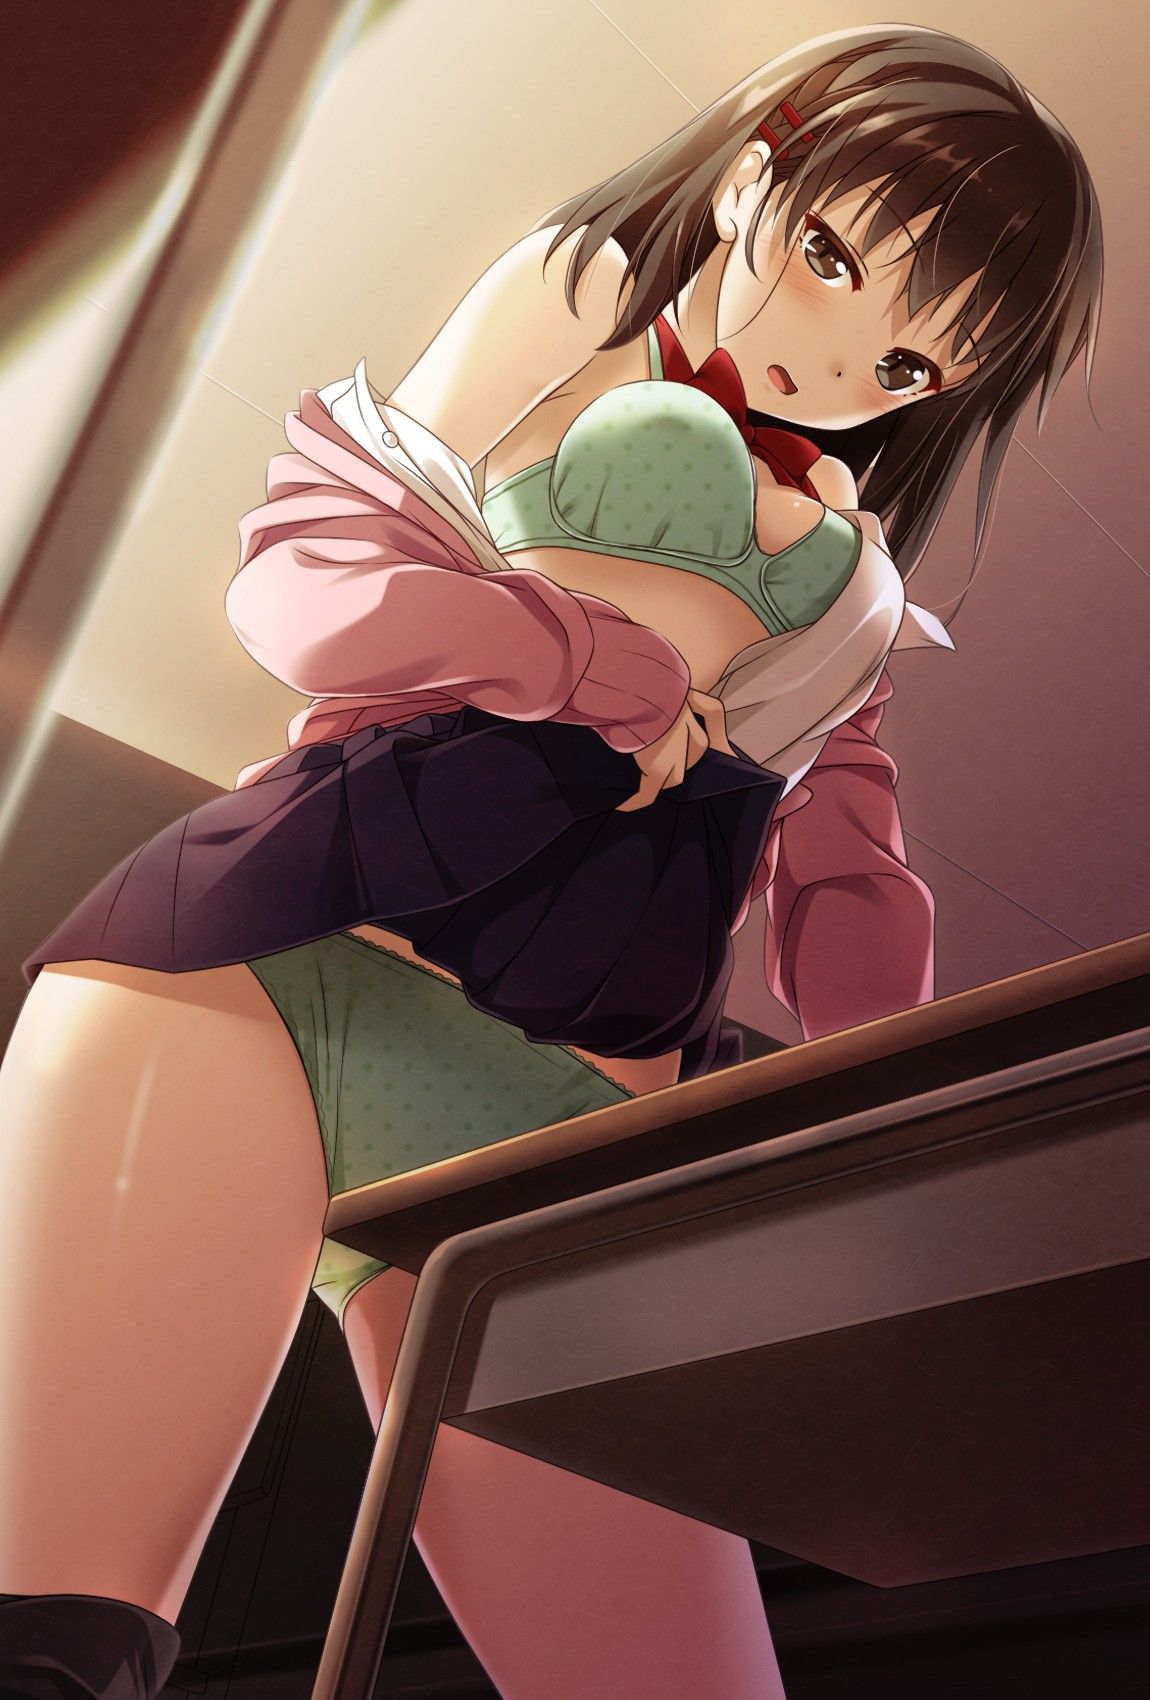 Erotic anime summary Beautiful girls who are masturbating by rubbing against corners or playing with fingers [secondary erotic] 21